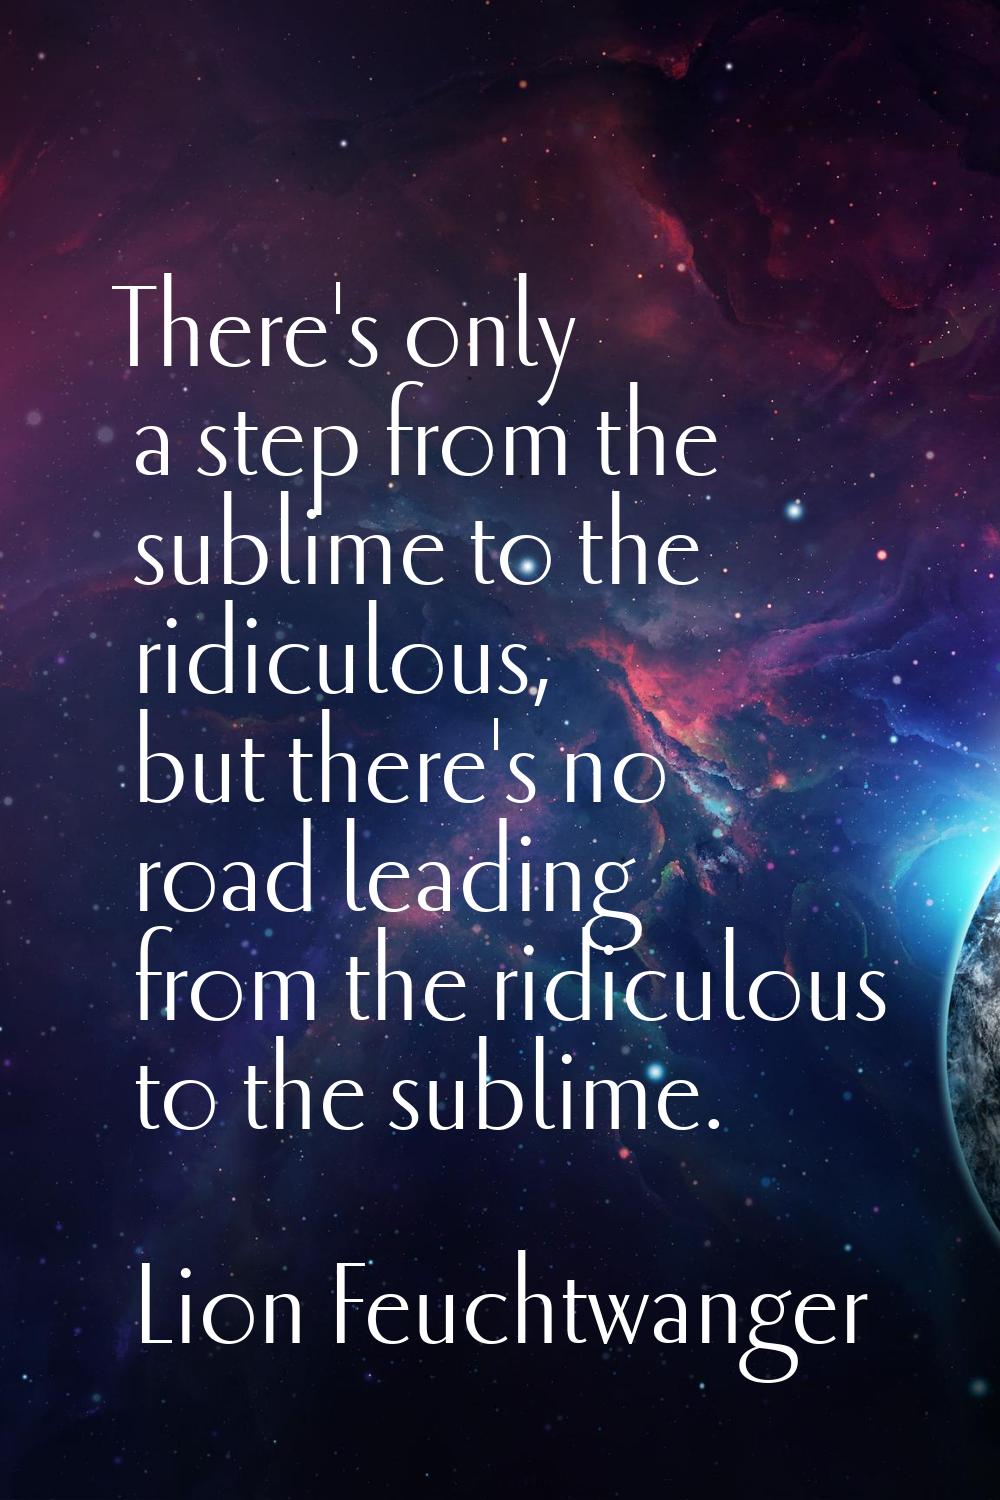 There's only a step from the sublime to the ridiculous, but there's no road leading from the ridicu